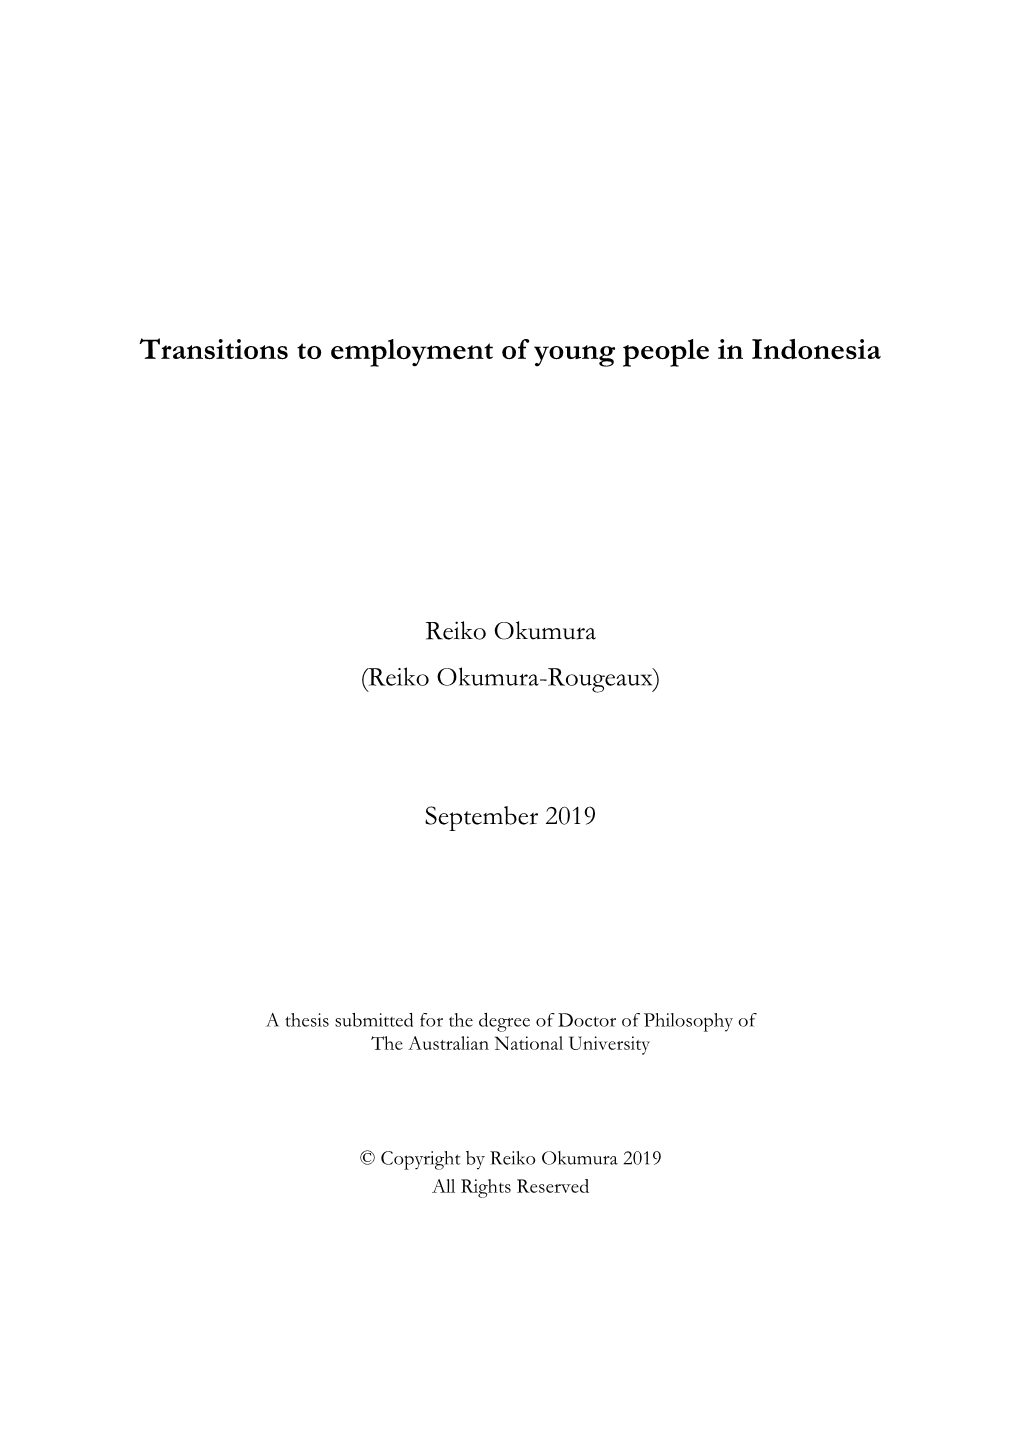 Transitions to Employment of Young People in Indonesia